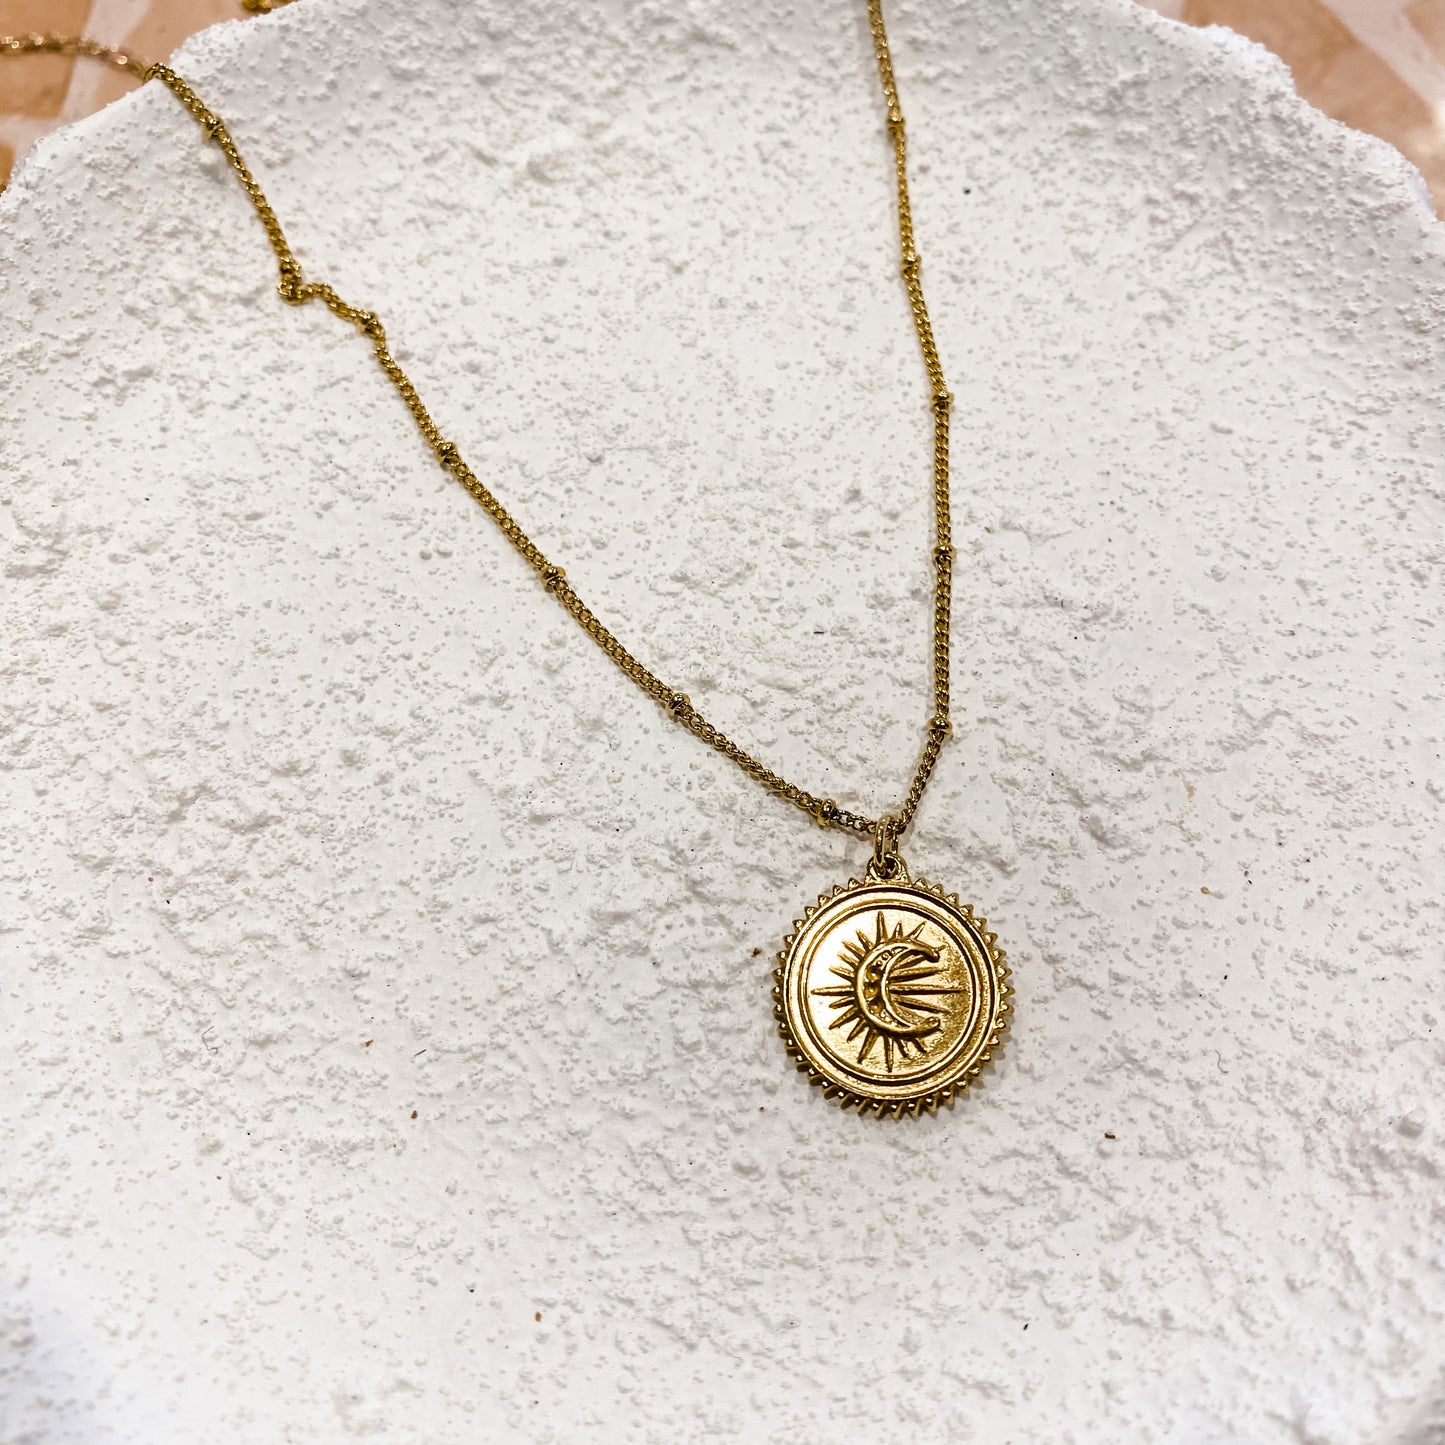 Moon Shield - Gold Stainless Steel Necklace